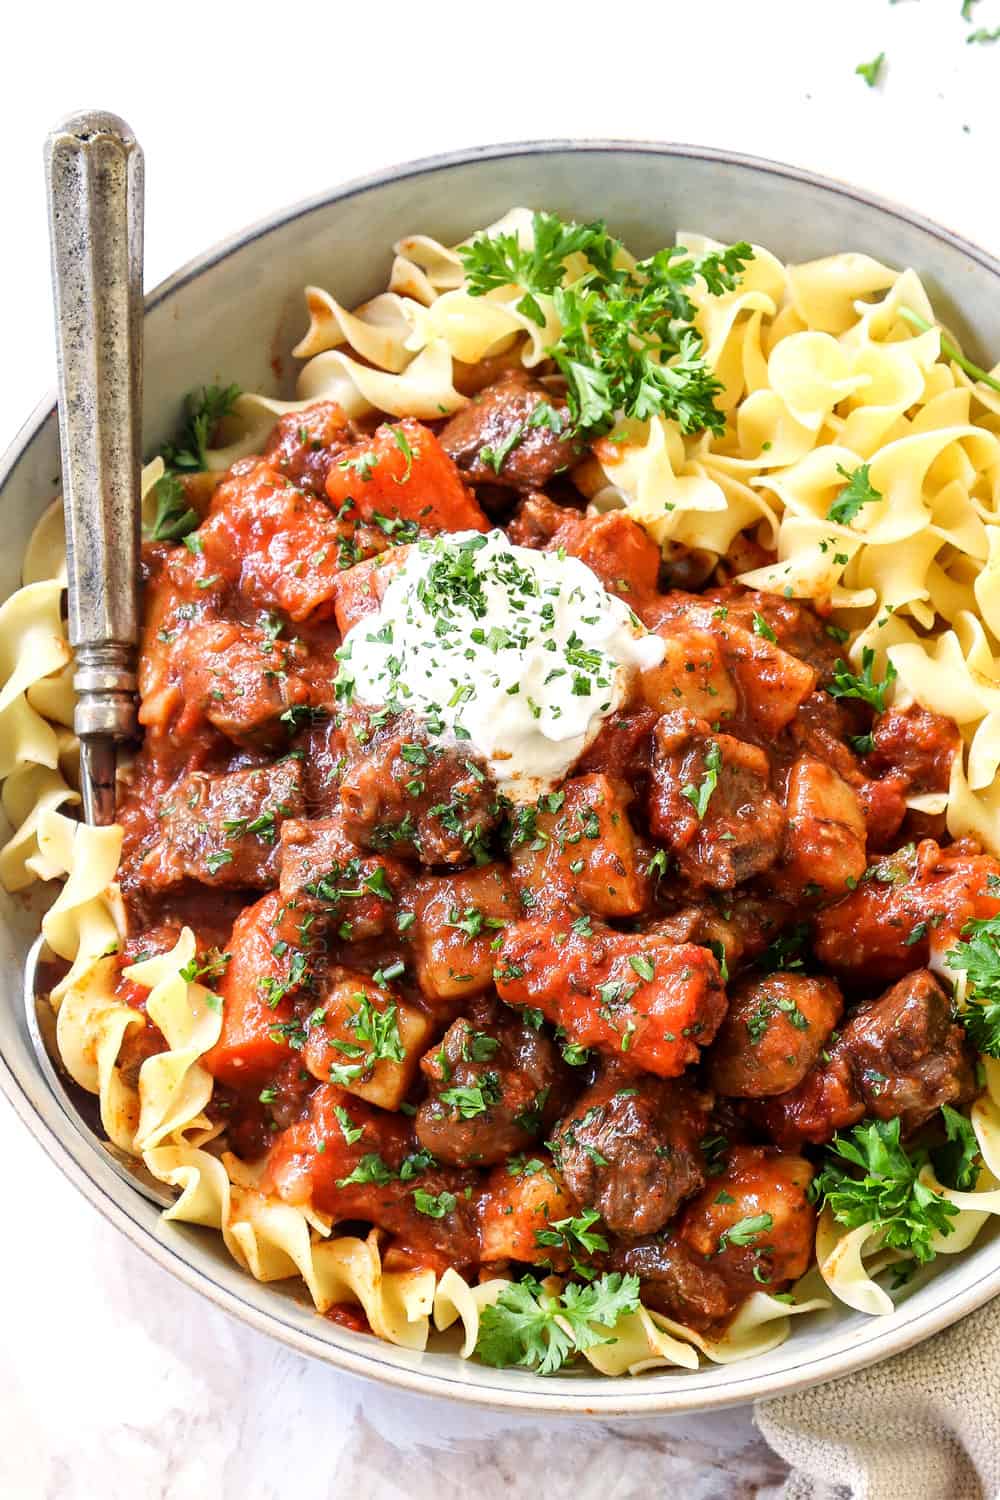 showing how to serve Hungarian Goulash recipe by adding sour cream to goulash in a bowl of egg noodles